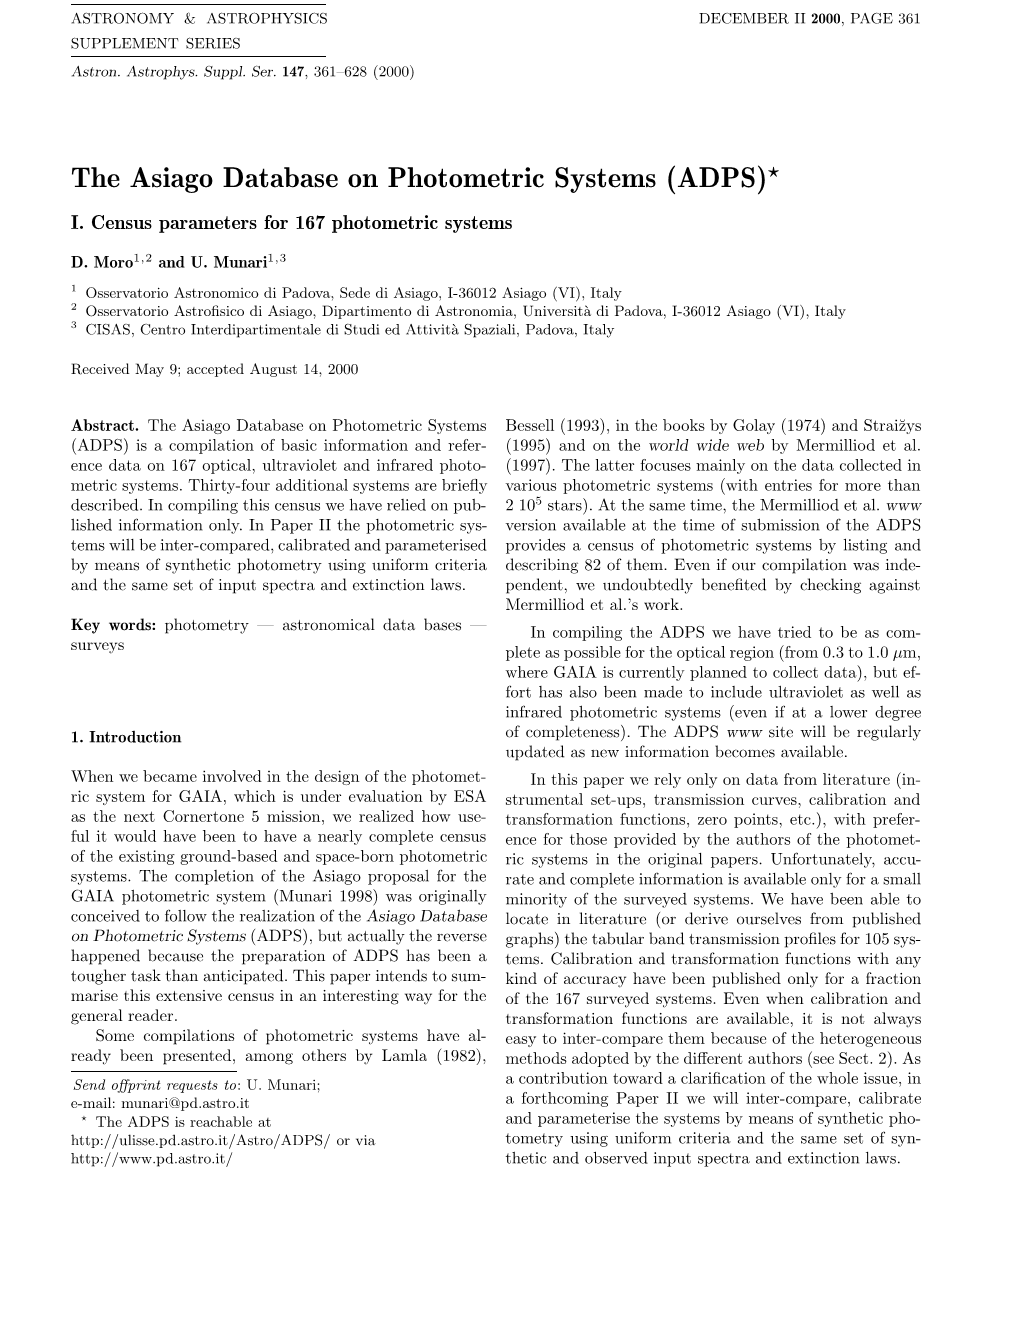 The Asiago Database on Photometric Systems (ADPS)?